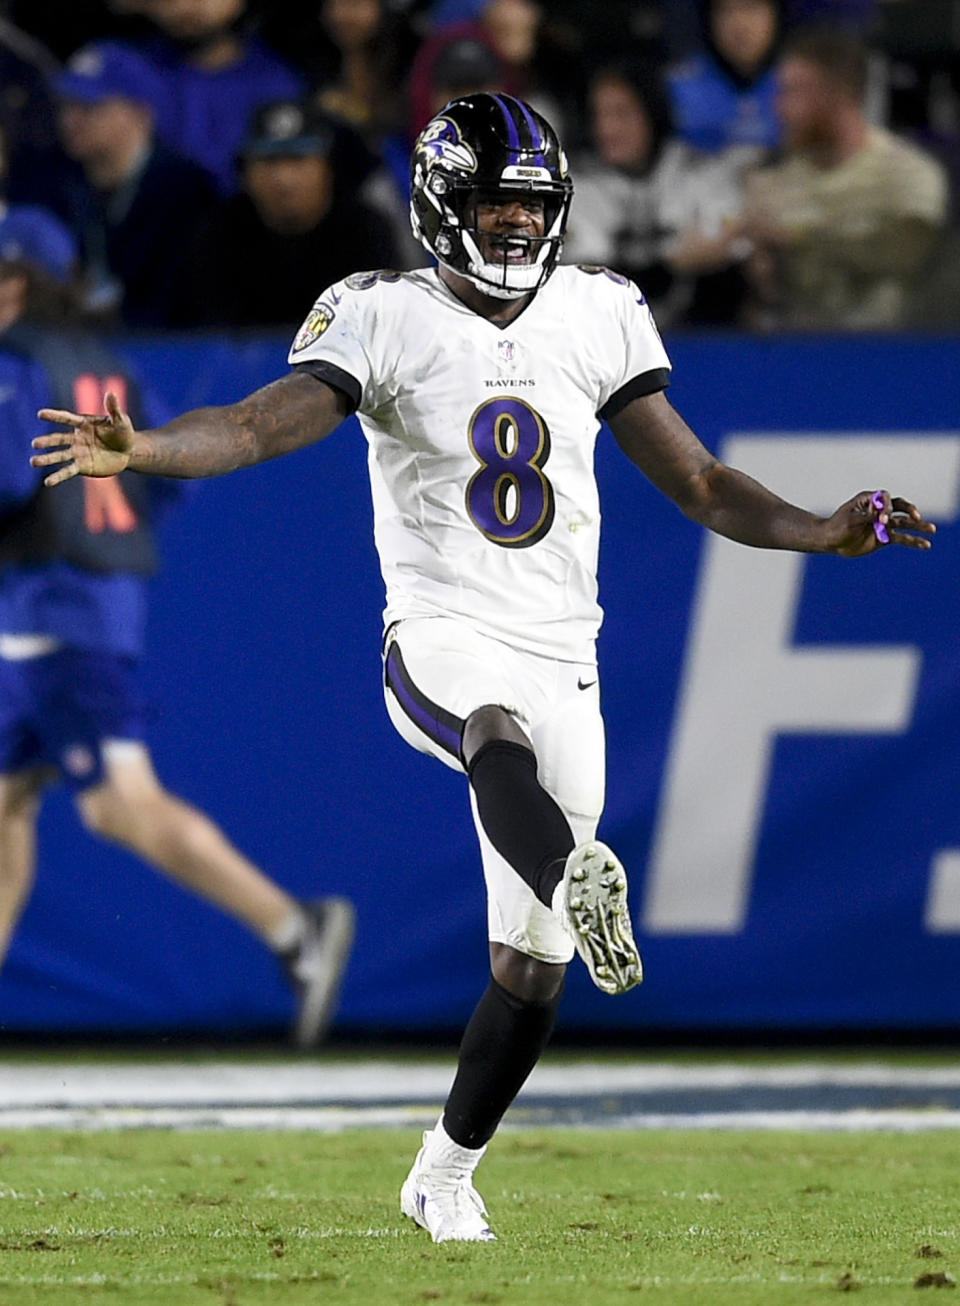 Baltimore Ravens quarterback Lamar Jackson celebrates after a touchdown against the Los Angeles Chargers during the second half in an NFL football game Saturday, Dec. 22, 2018, in Carson, Calif. (AP Photo/Kelvin Kuo)